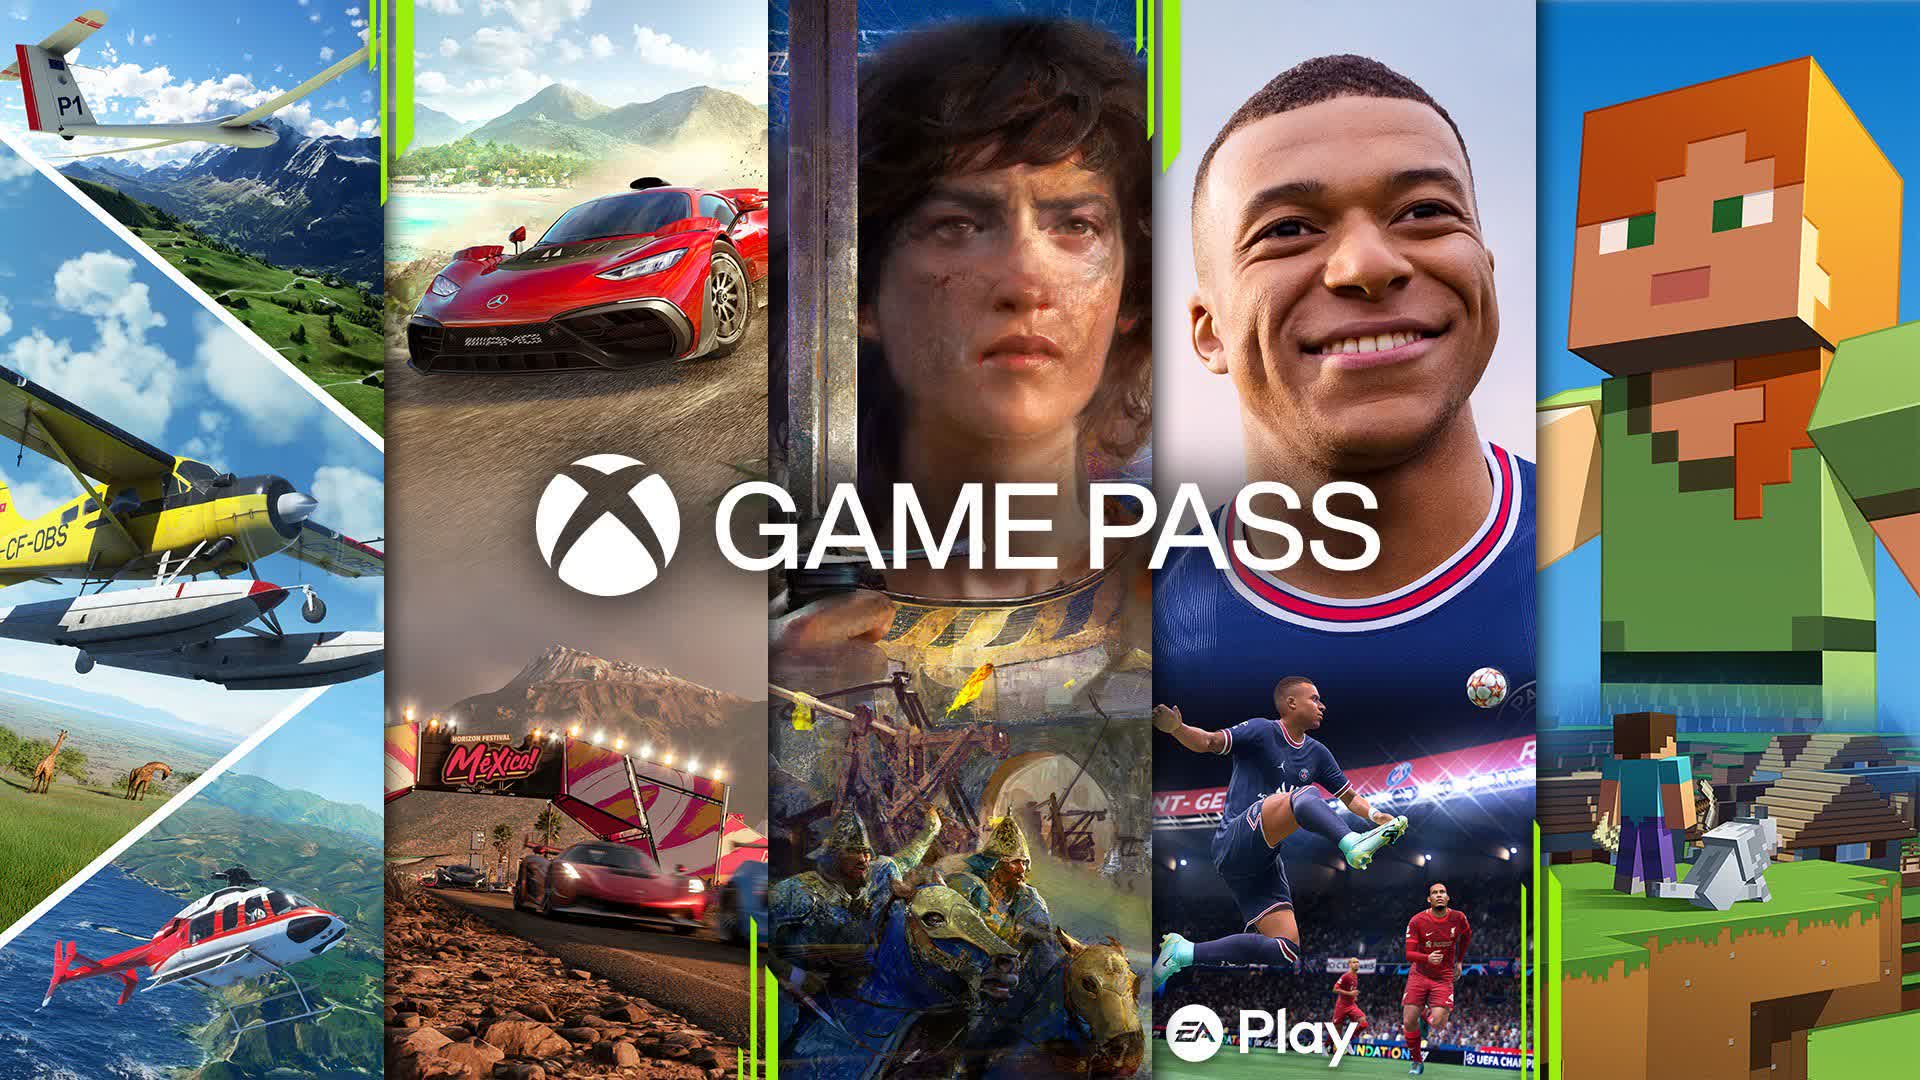 PC Game Pass comes to 40 more countries in Europe, Latin America, and the Middle East